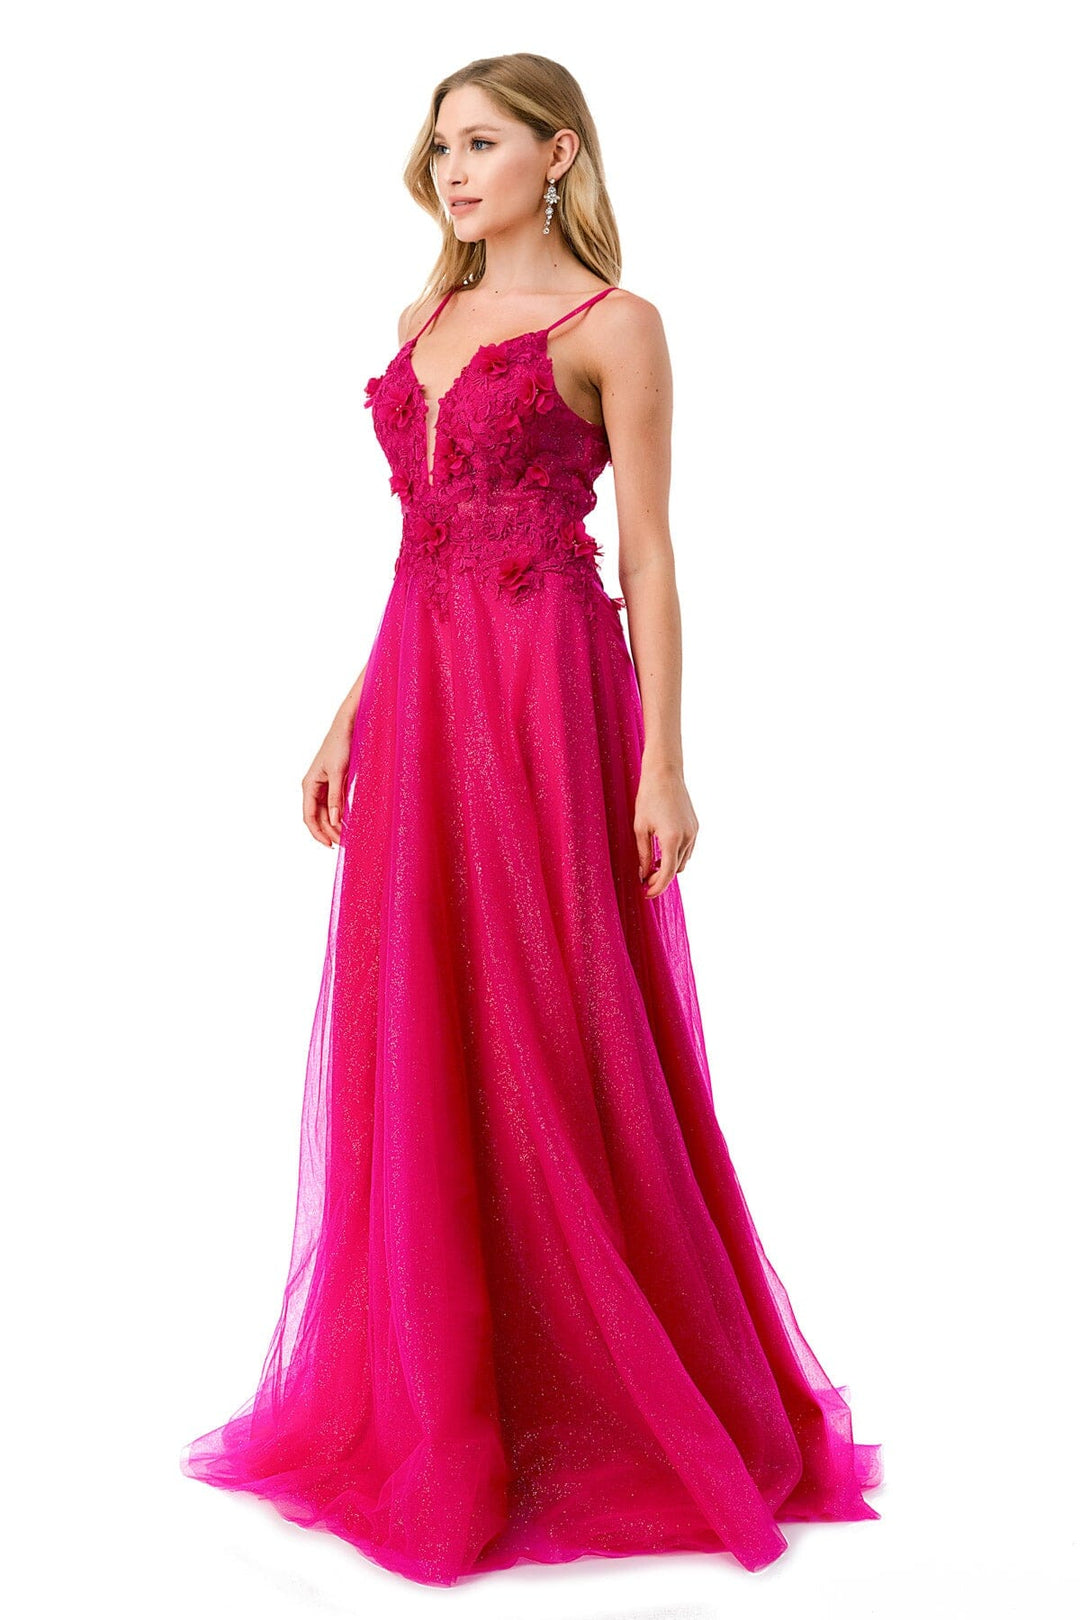 3D Floral Long Sheer Corset Tulle Dress by Coya L2782A